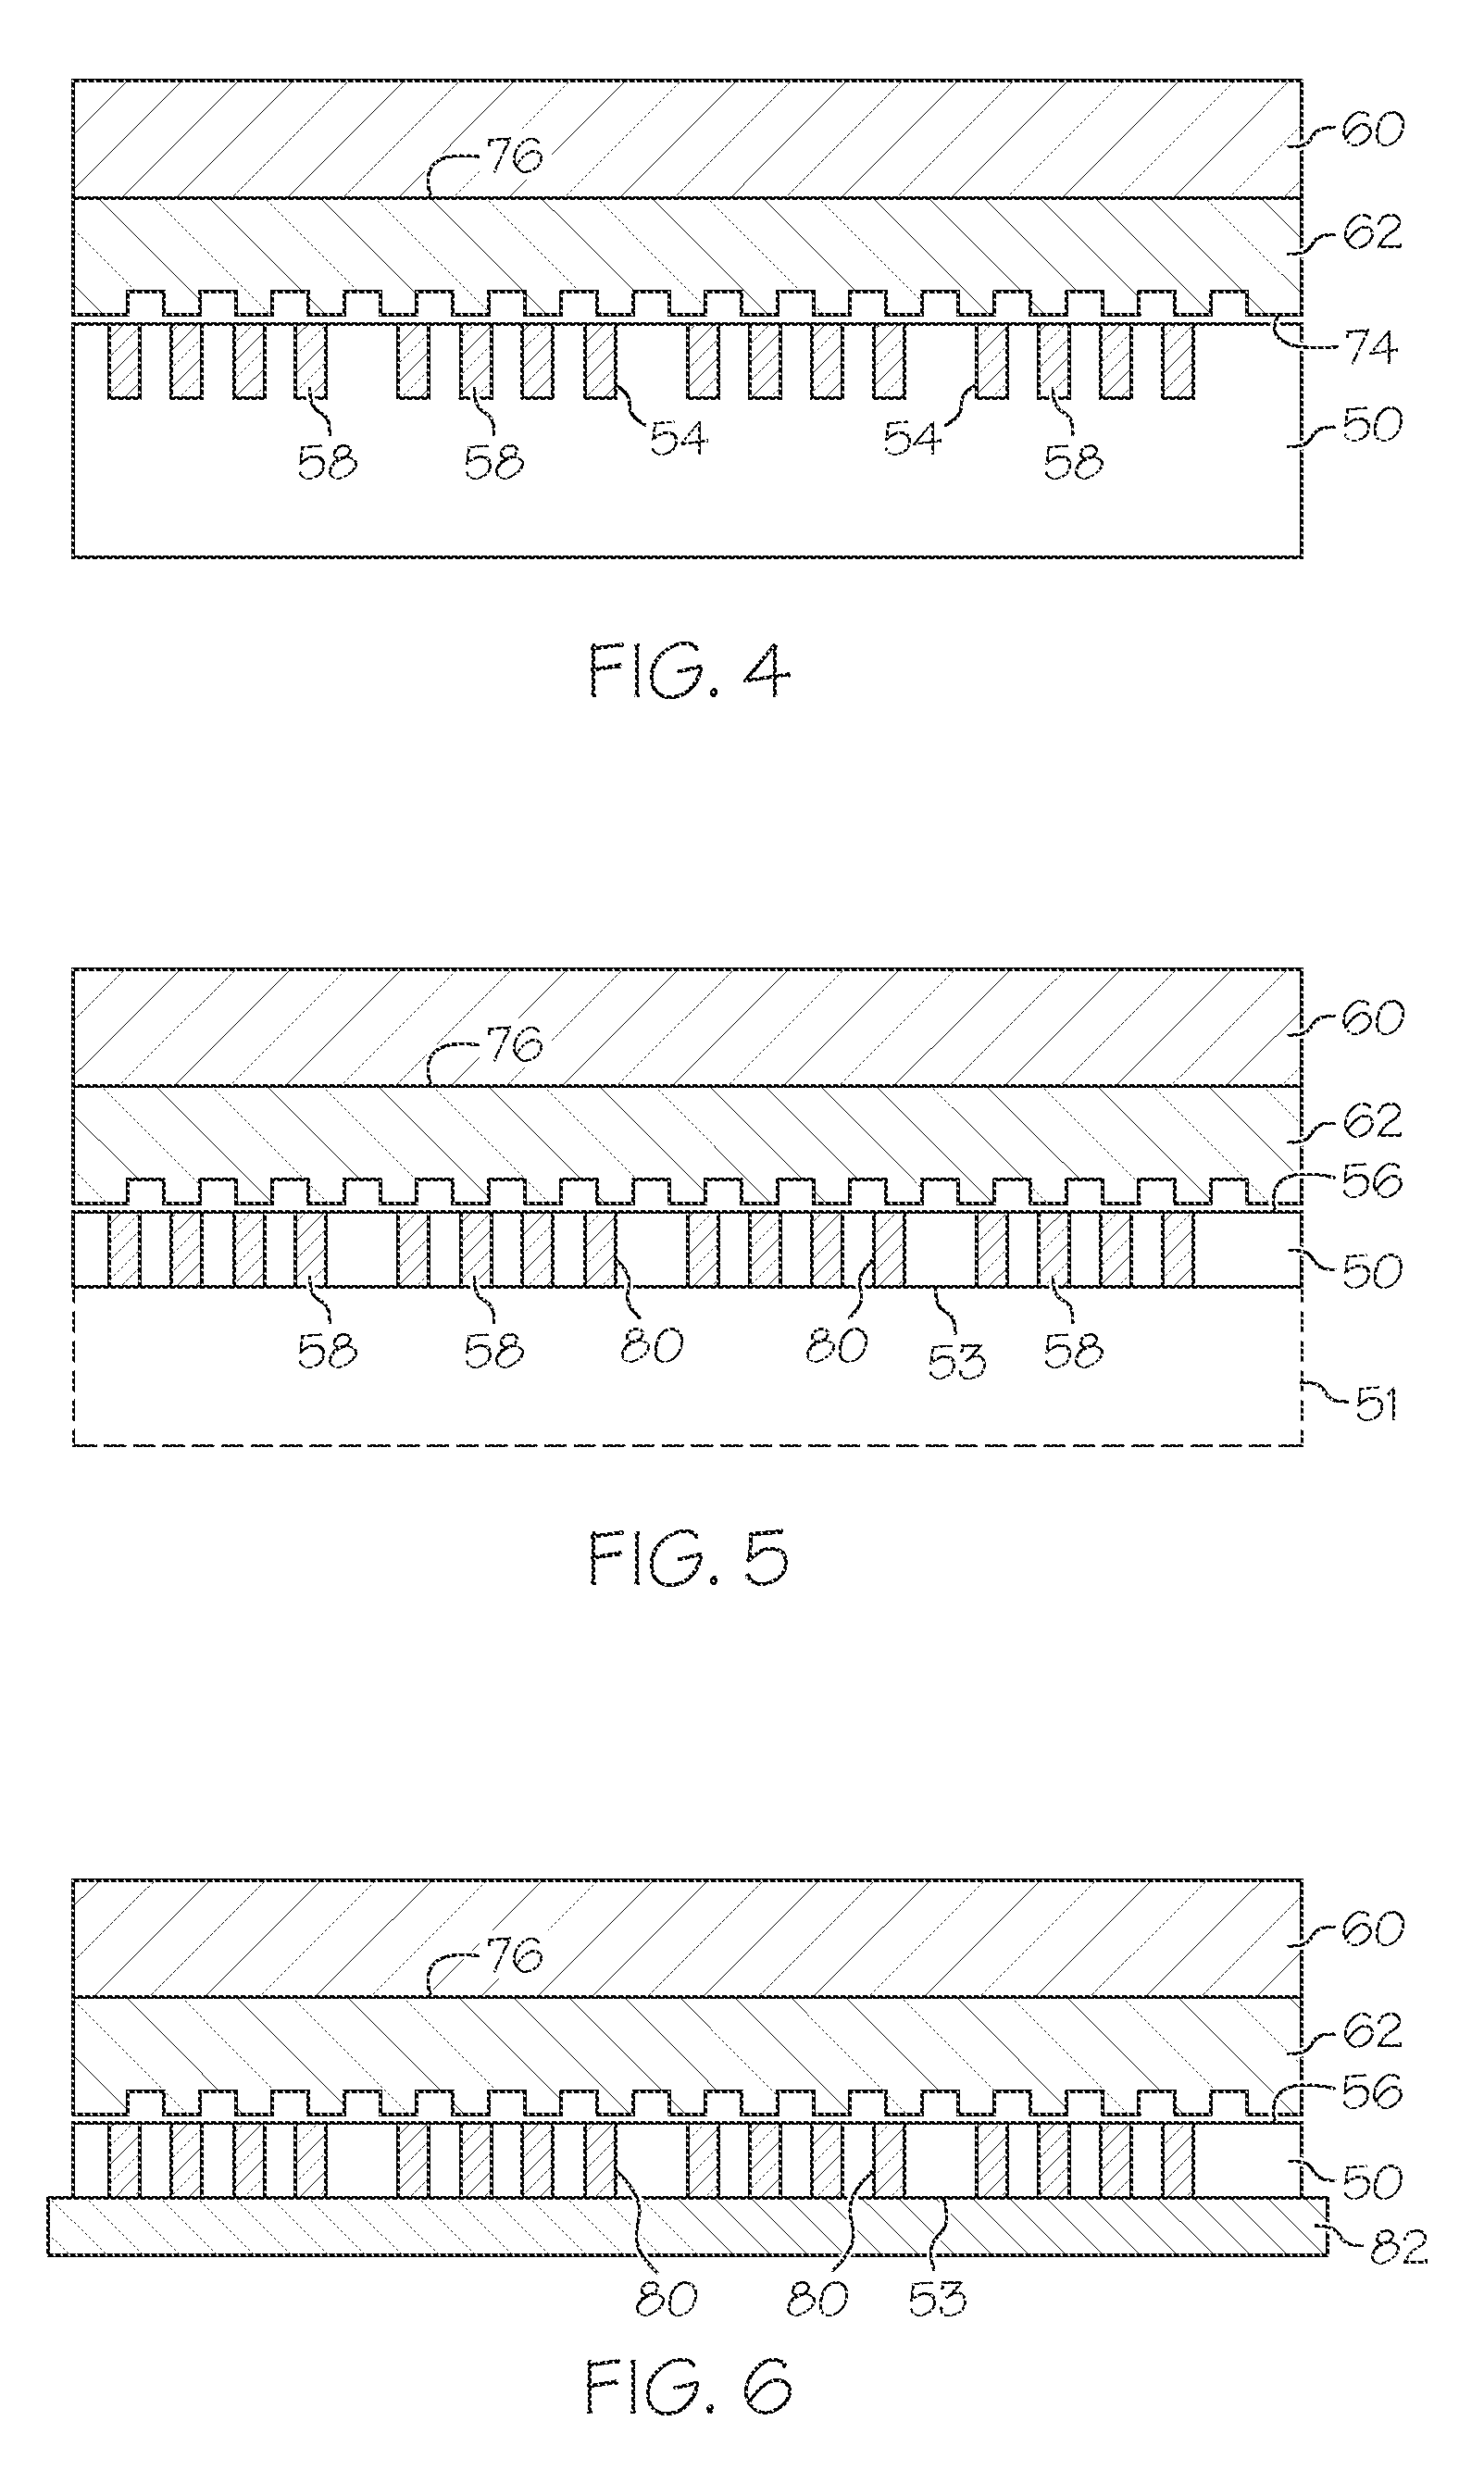 Method for fabricating through substrate vias in semiconductor substrate